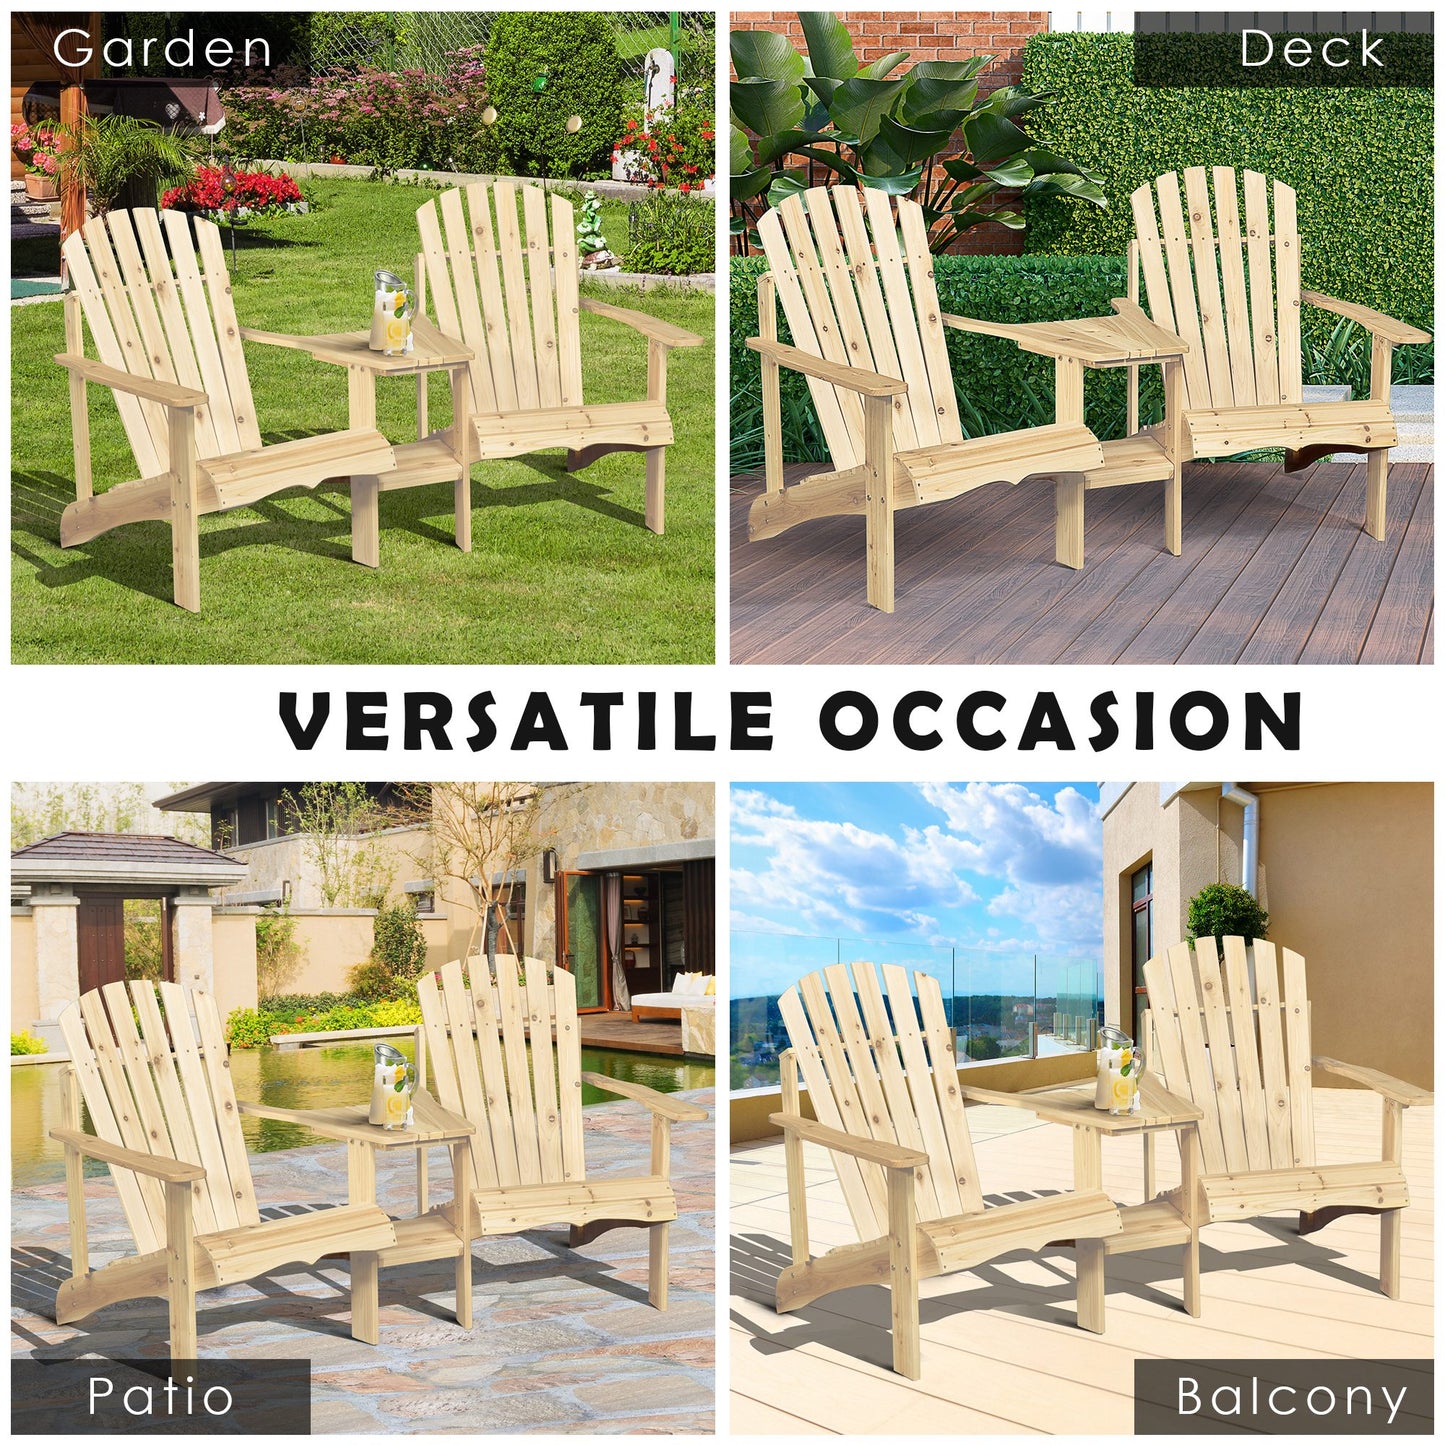 Outsunny Wooden Double Adirondack Chairs Loveseat with Centre Table & Umbrella Hole, Outdoor Garden Patio Furniture for Relaxation, Natural